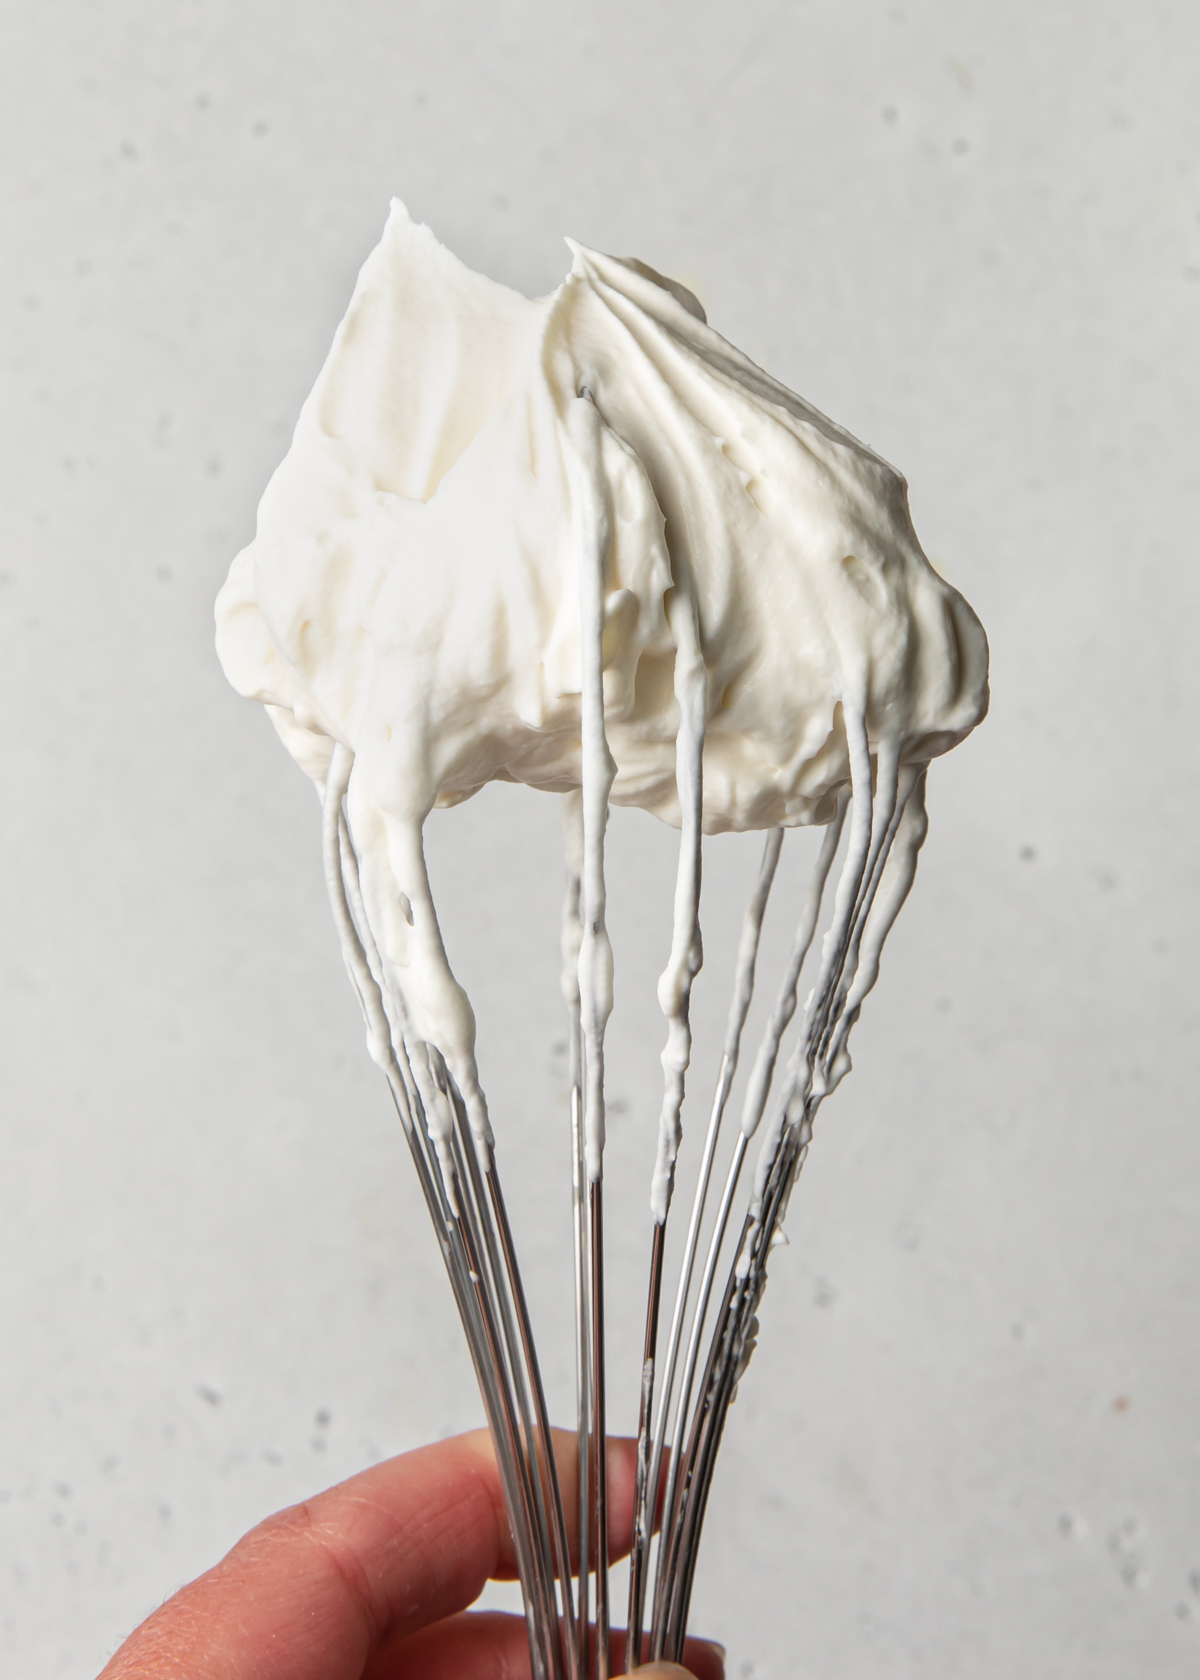 A whisk showing whipped cream stiff peaks